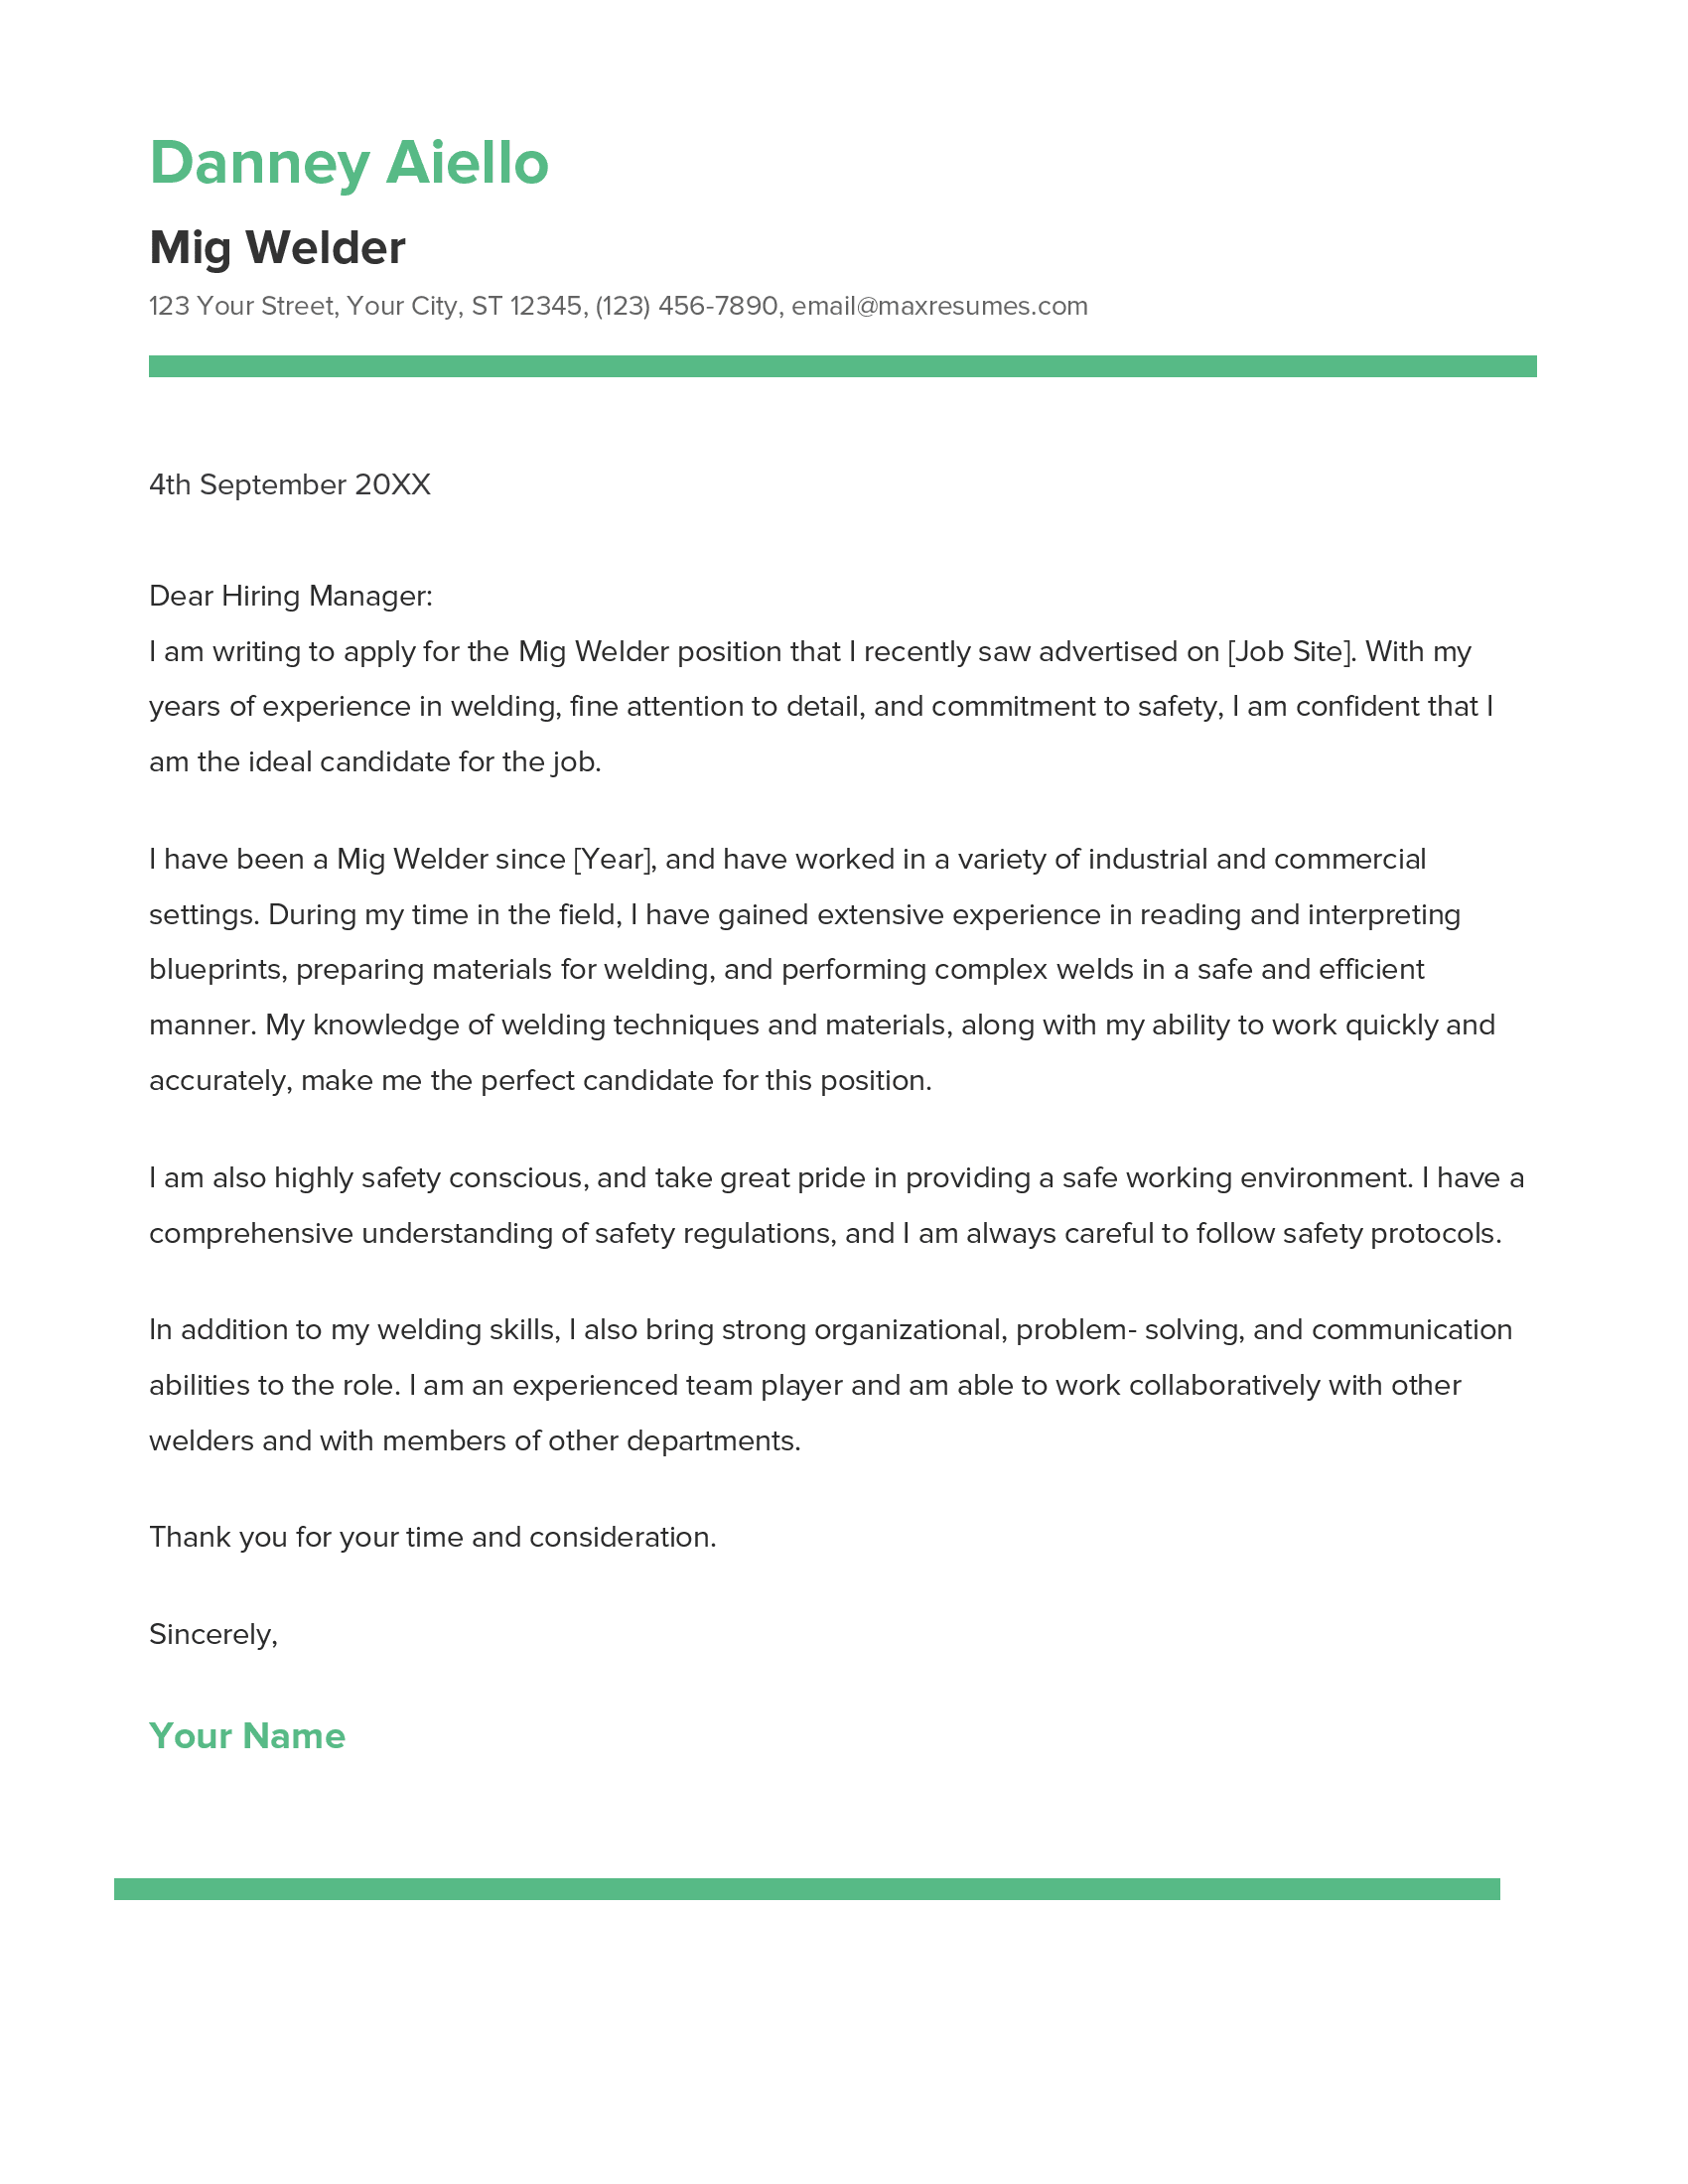 Mig Welder Cover Letter Example